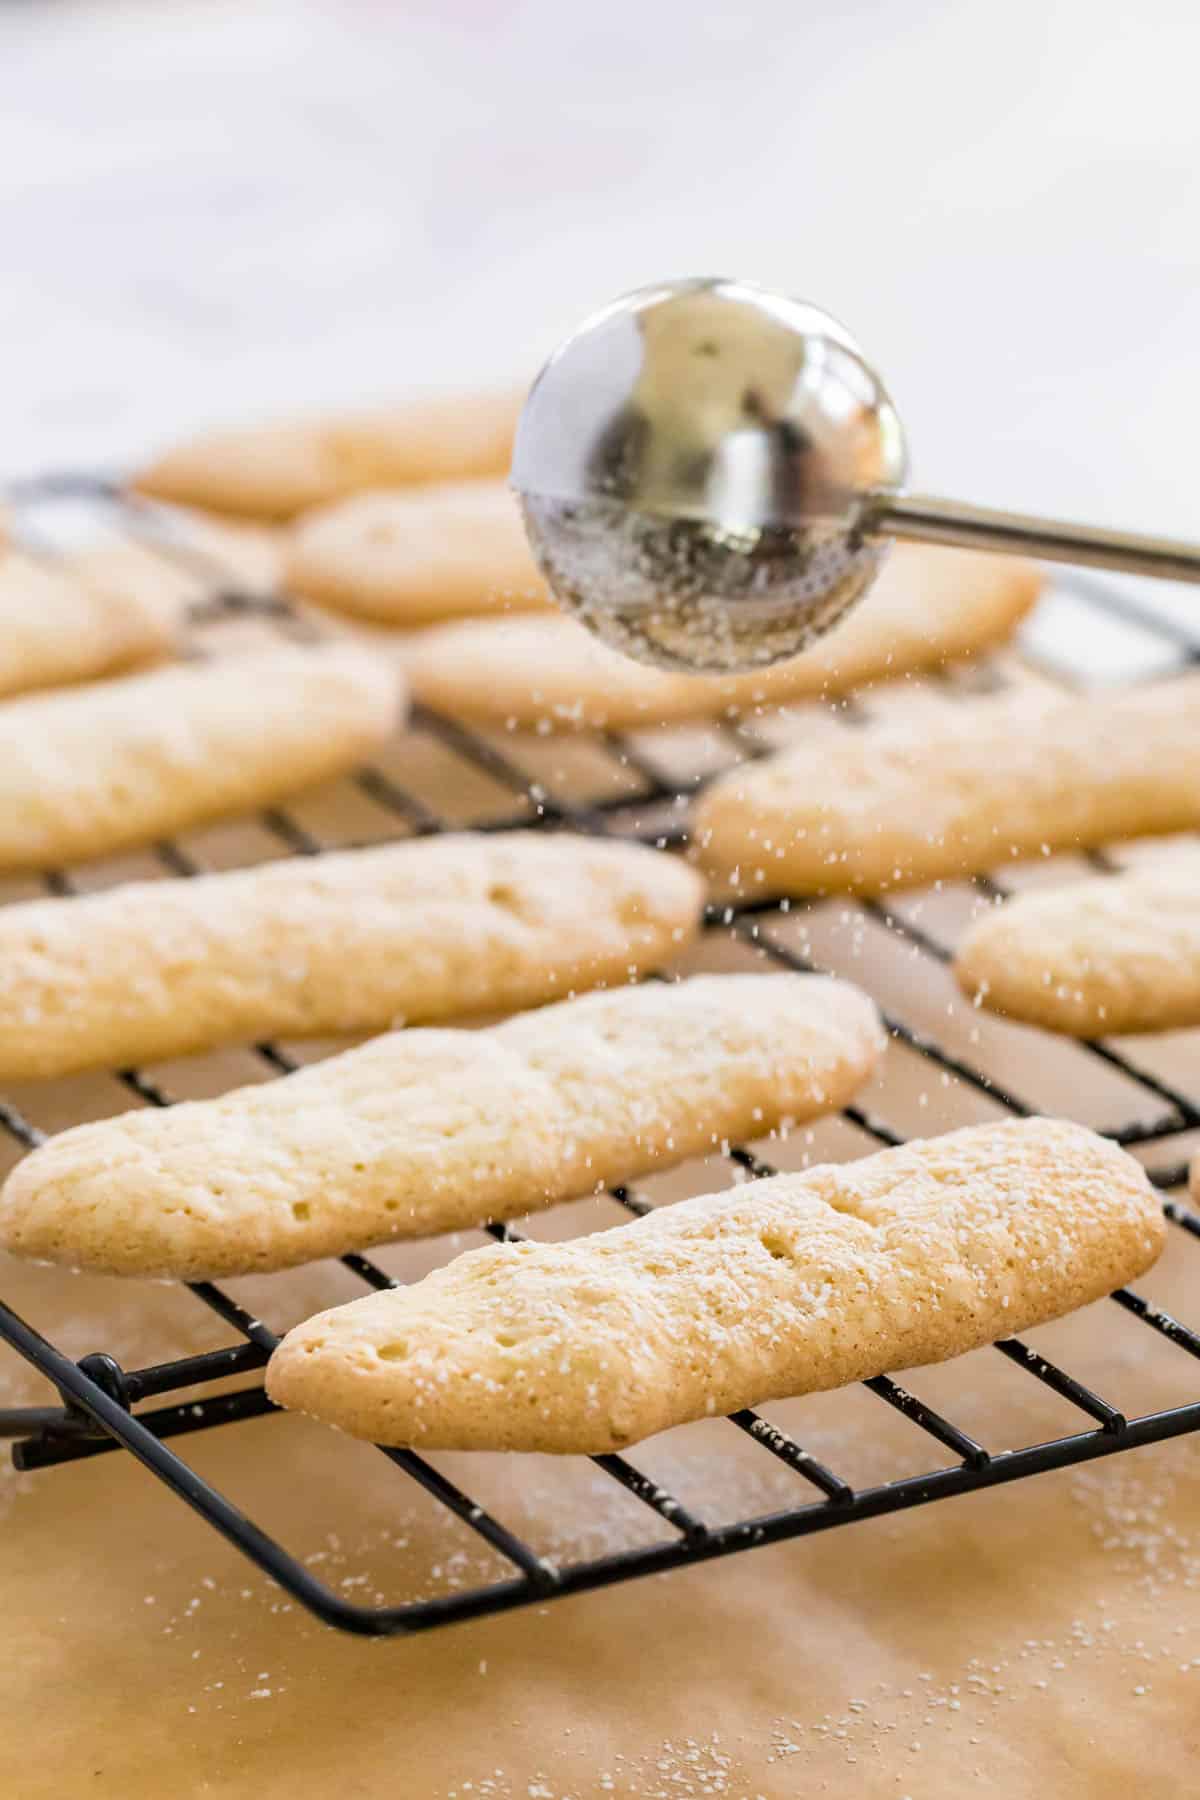 Gluten free ladyfingers are dusted with powdered sugar while cooling on a wire rack.